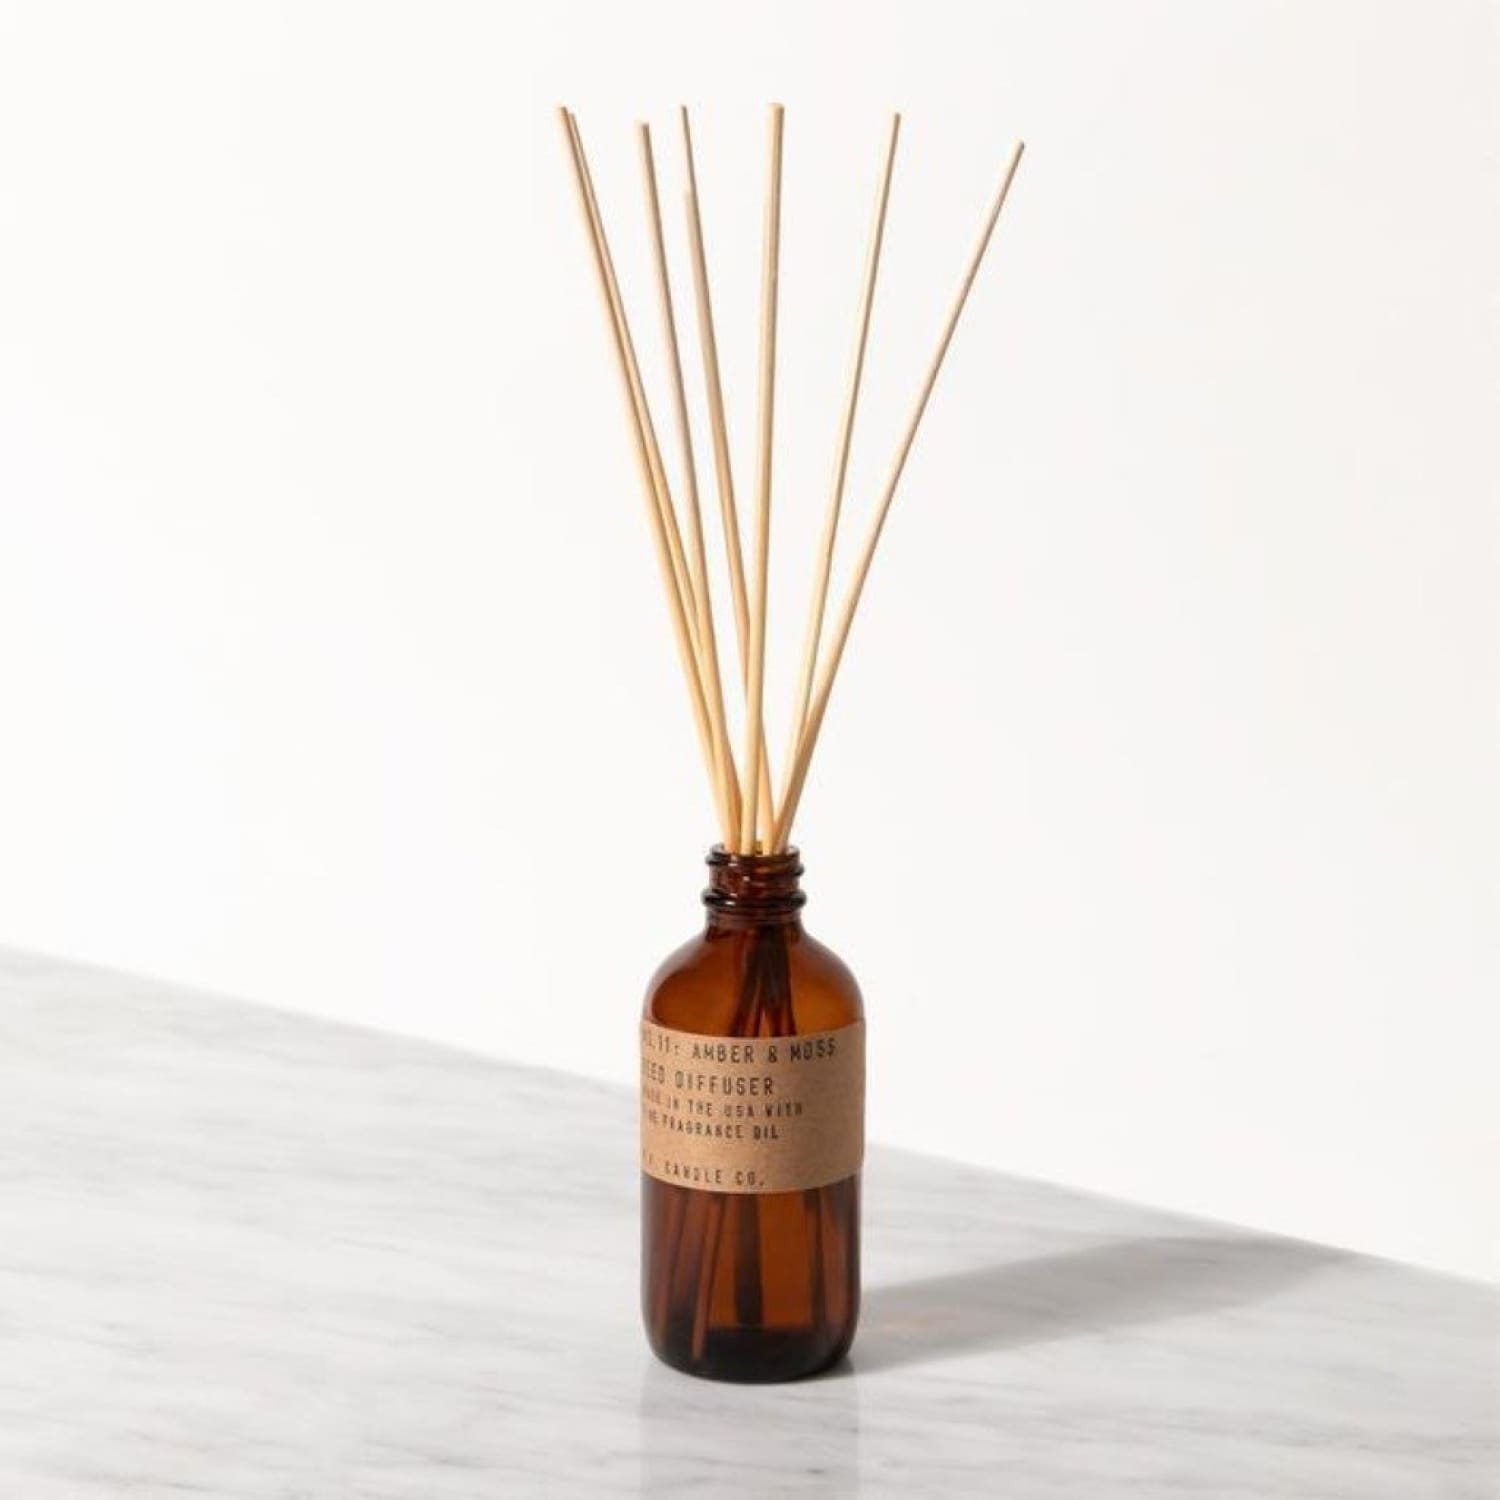 P.f. Candle Co. Reed Diffuser - Amber & Moss Amber, Amber 